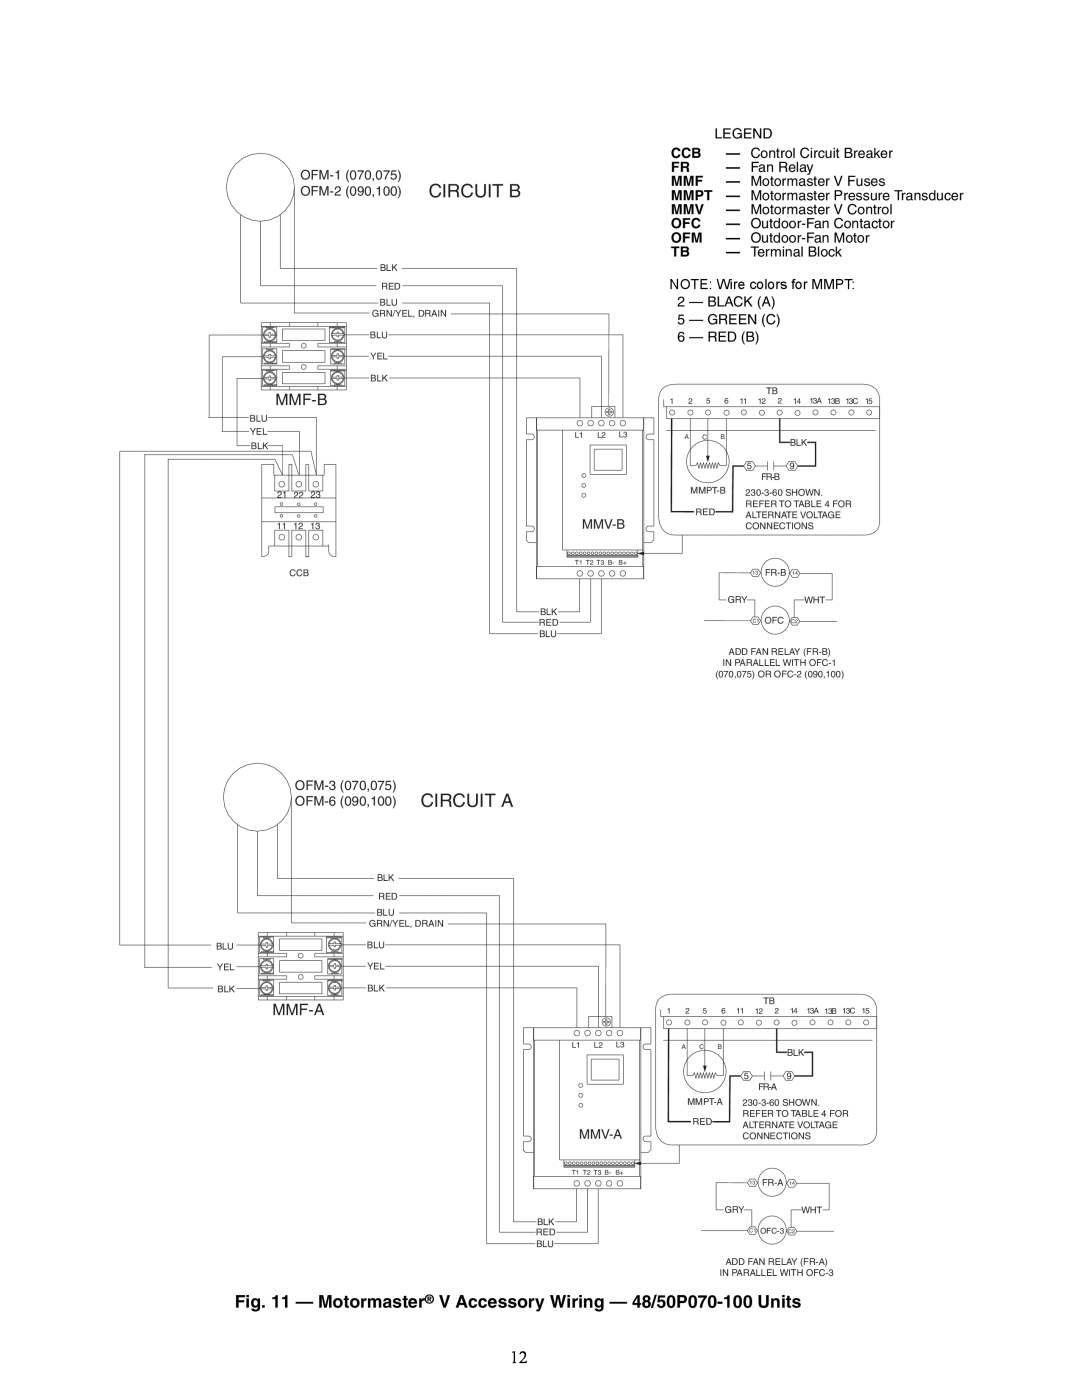 Carrier 48/50P4, 48/50P2, 48/50P3, 48/50P5030-100 installation instructions Circuit B, Circuit A, a48-8569, Mmf-B, Mmf-A 